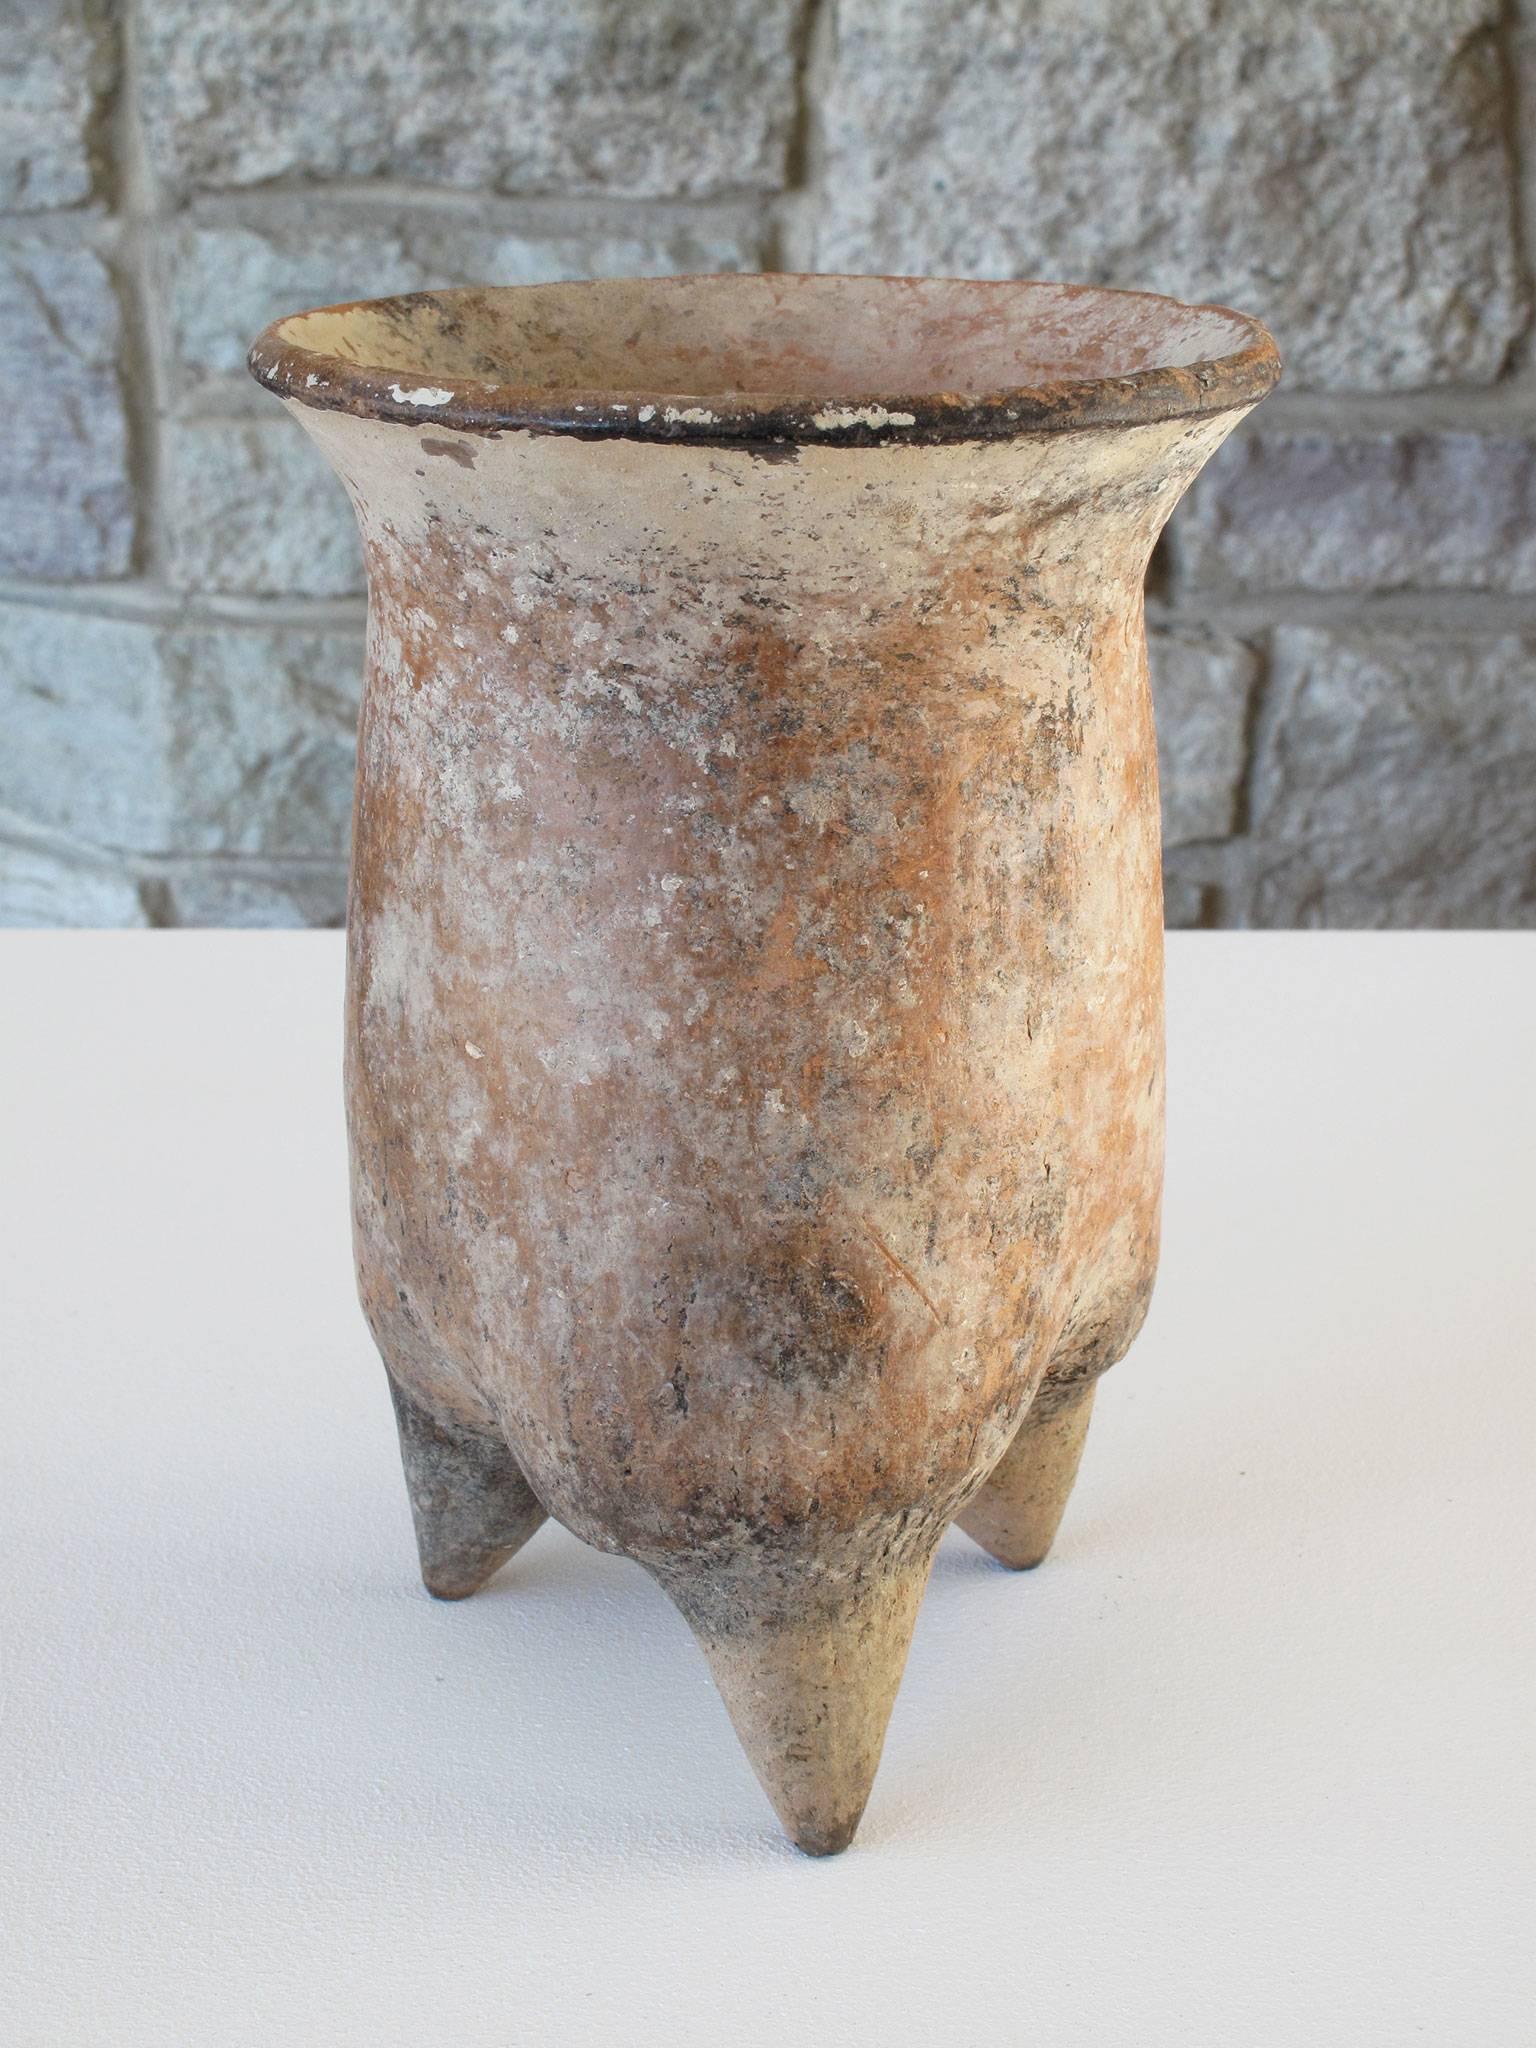 Fascinating glazed pottery piece with cylindrical form and flared rim standing on three, pointed, conical supports, most likely earthenware and made by the Xiajiadian Culture from Inner Mongolia, circa 2300-1600 B.C. Dimensions: 7 5/8 high x 5 1/4